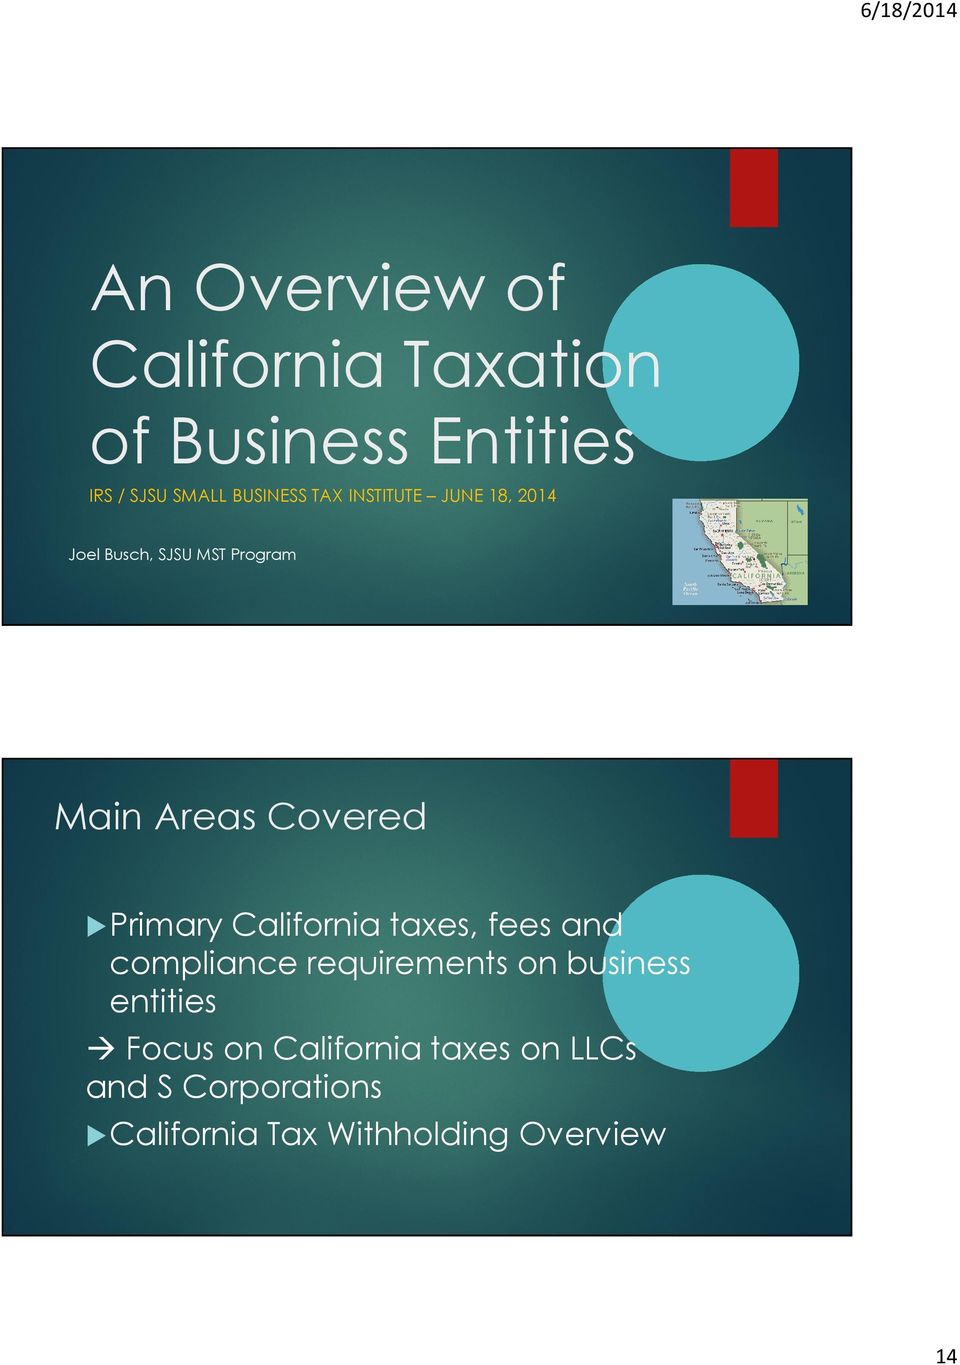 Primary California taxes, fees and compliance requirements on business entities